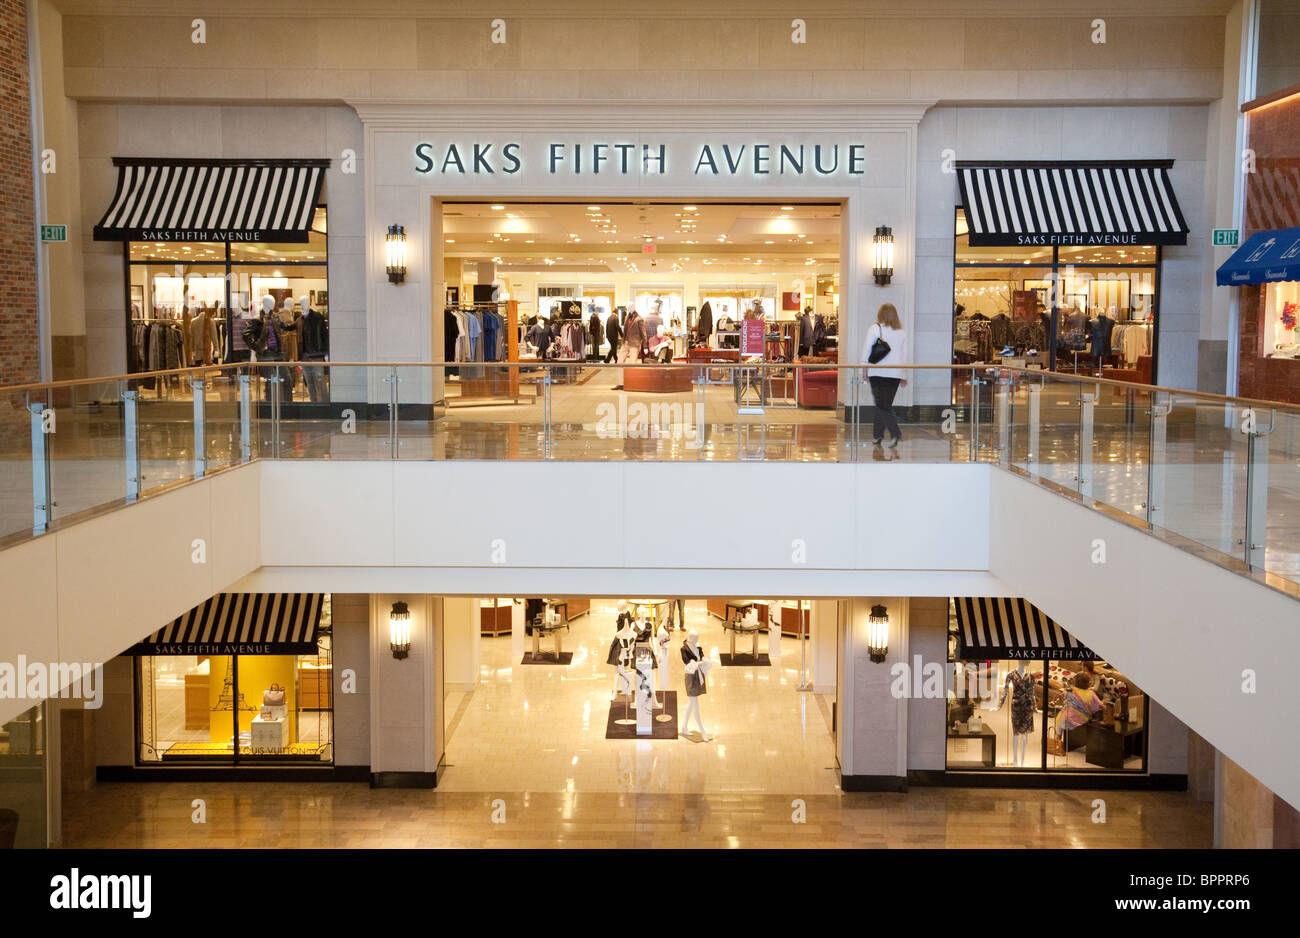 Saks Fifth Avenue, Malls and Retail Wiki